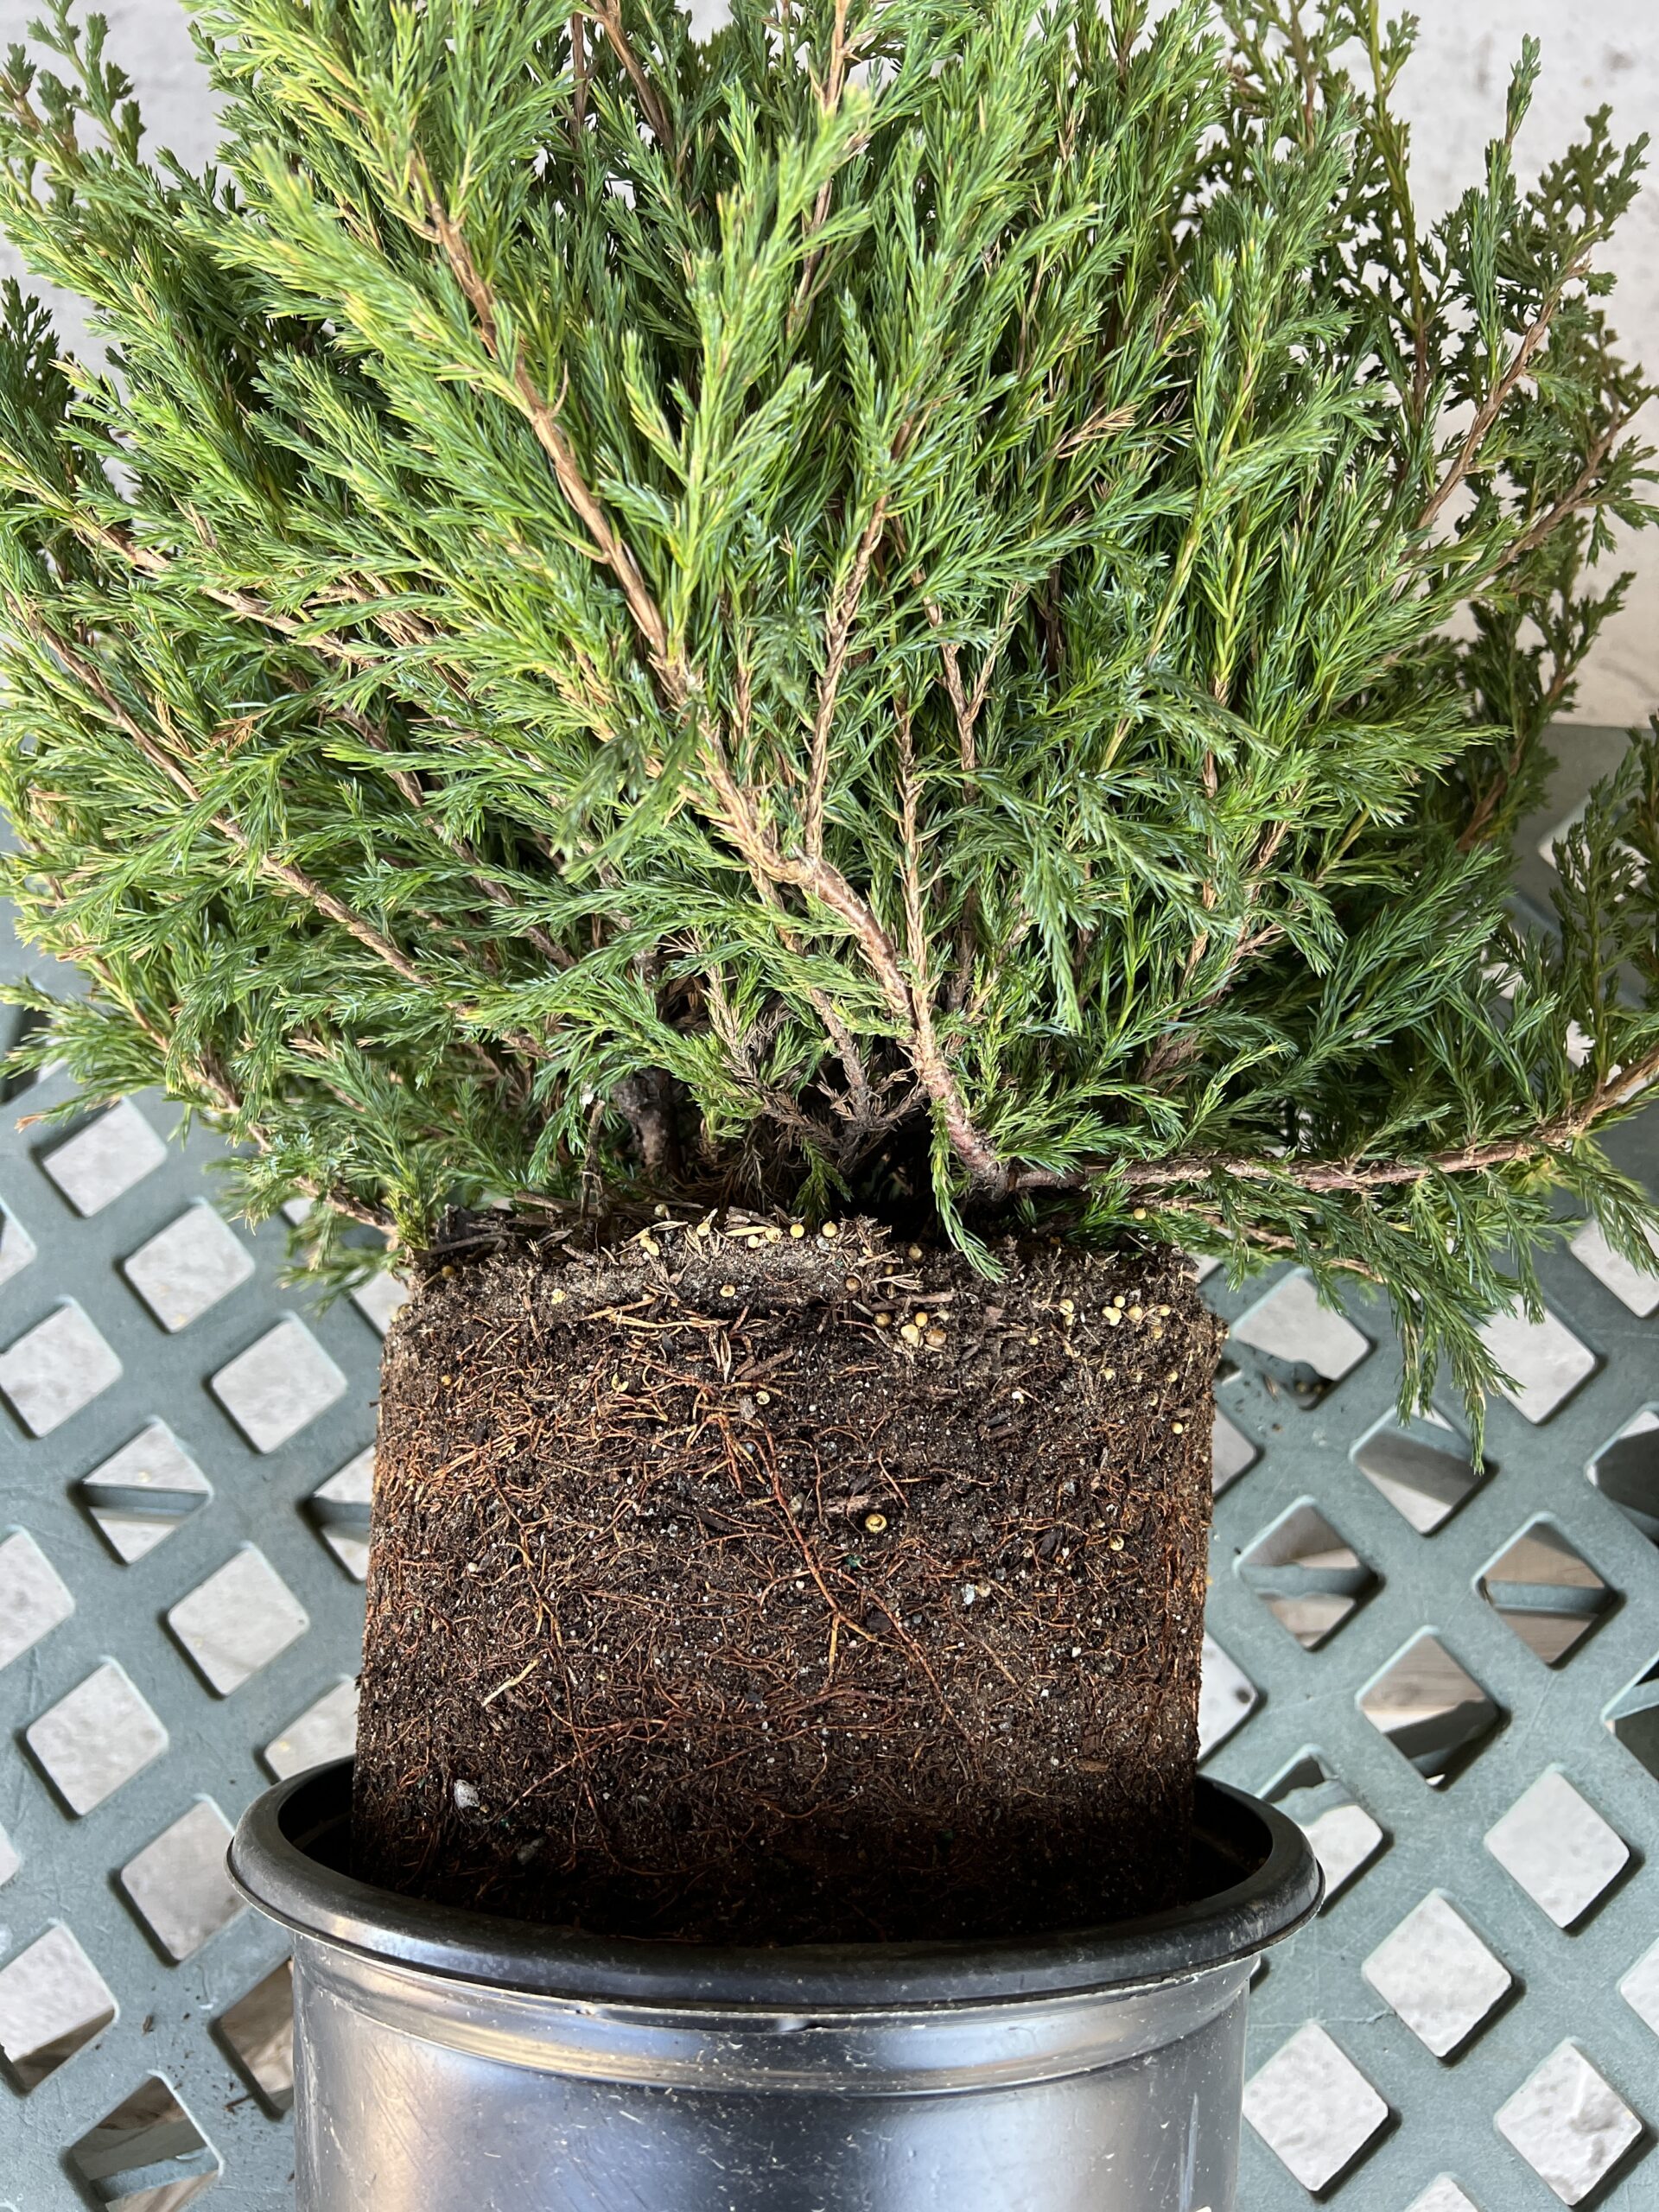 The same Juniper, but pulled out of the pot. The root mass shows that while the roots are well formed the plant is not yet pot-bound, a good thing. By simply pushing your fingers into the root mass, most of the roots can be teased out and opened up easily. Note that the soil has sand in it to aid in drainage and the small round “prills” or pellets near the top of the soil are time-release fertilizer pellets used at the nursery. ANDREW MESSINGER